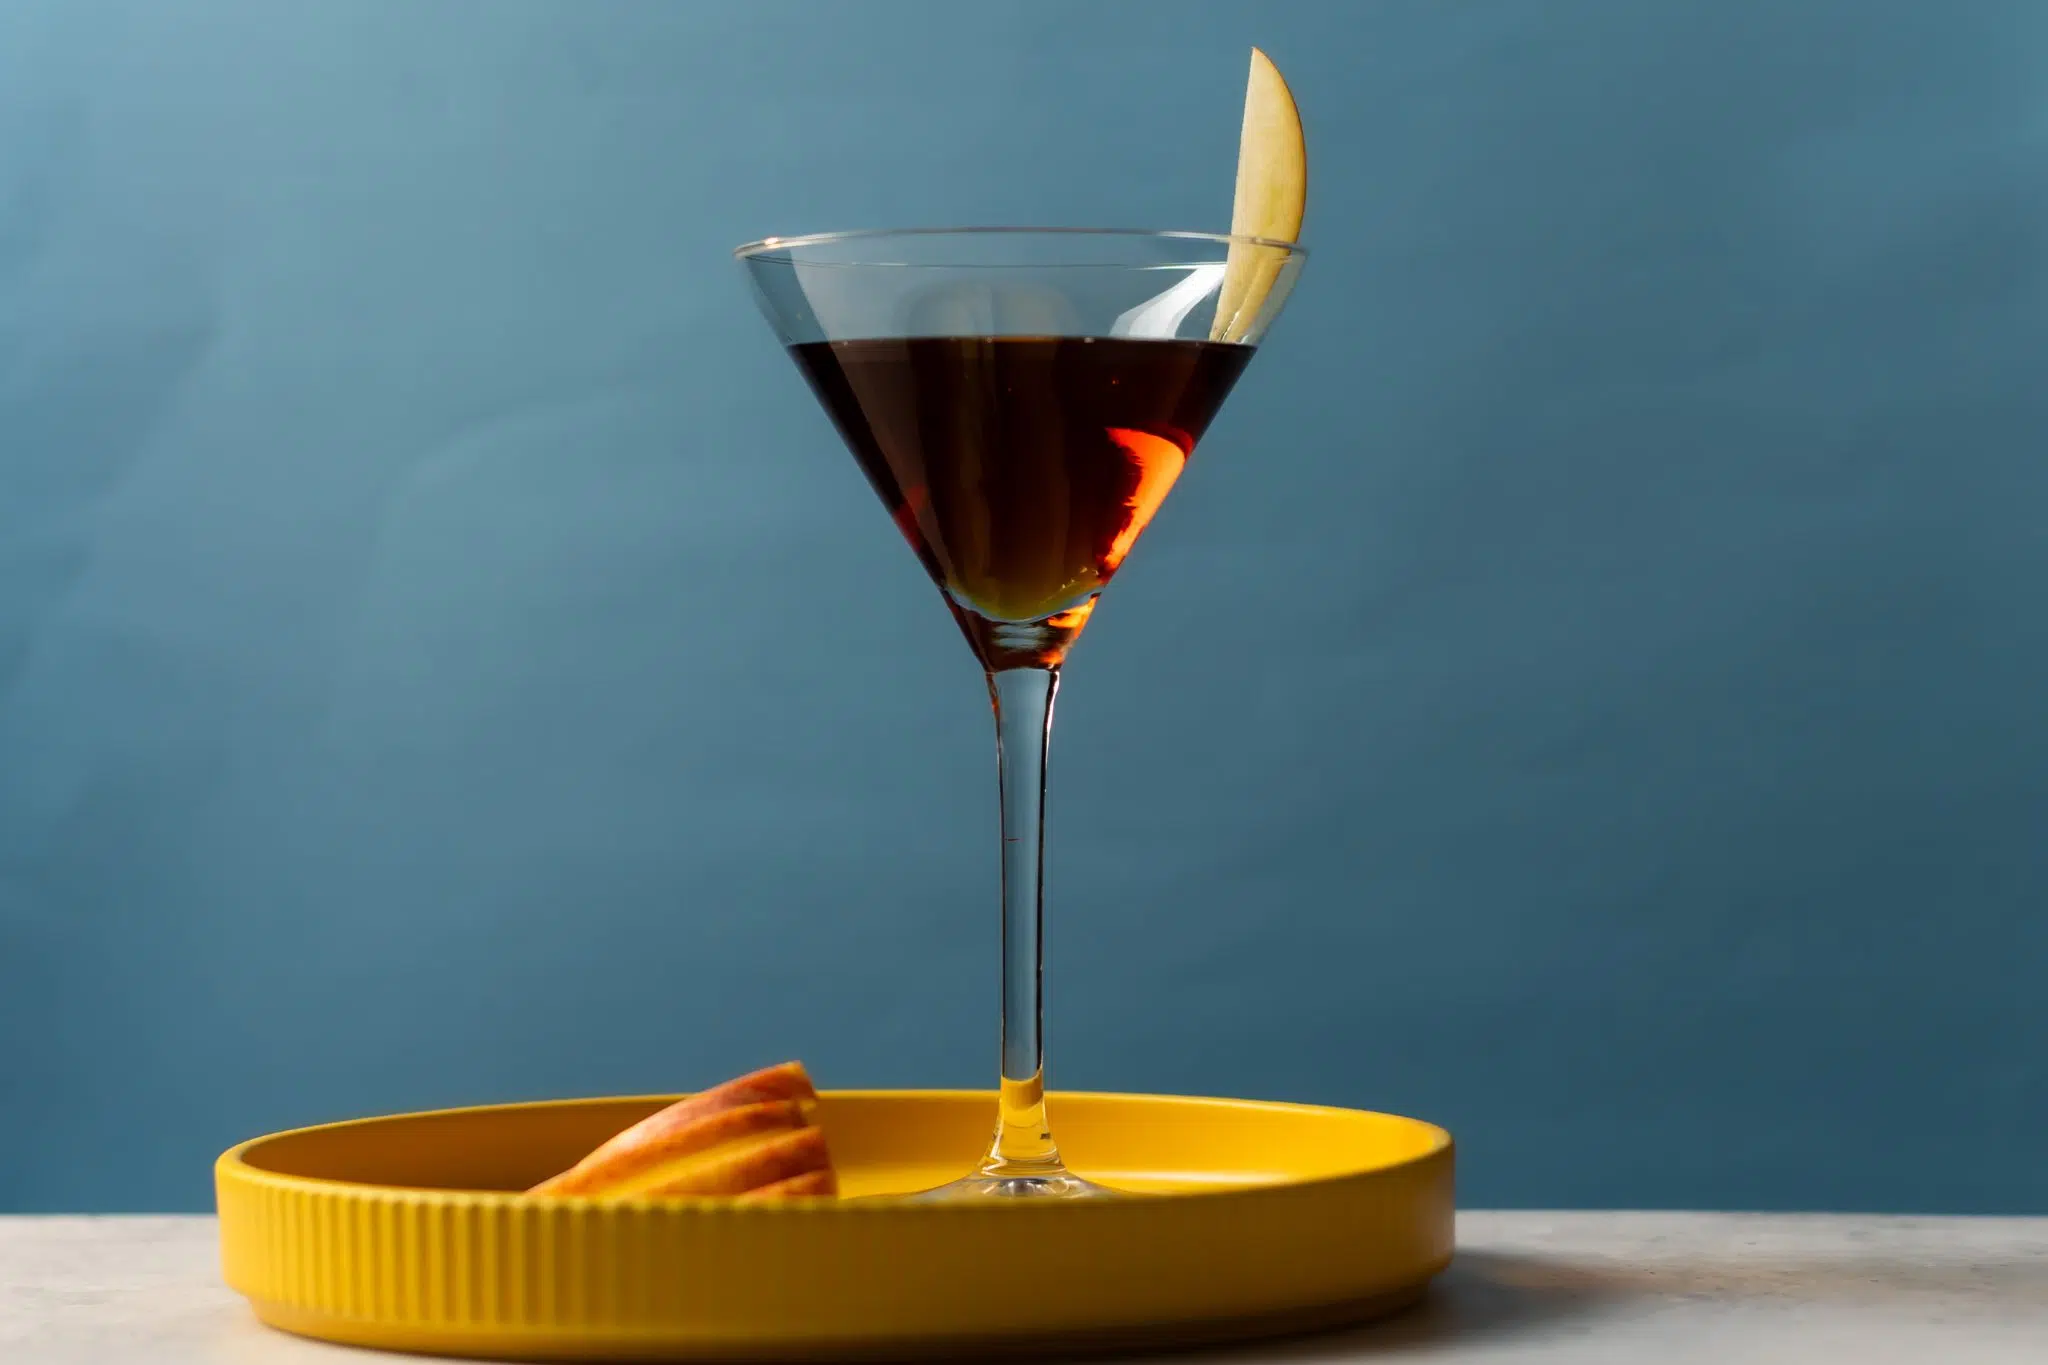 A side shot of an Apple Manhattan cocktail in a martini glass on a yellow tray placed on a white surface with apple slice on a side, in front of a blue background